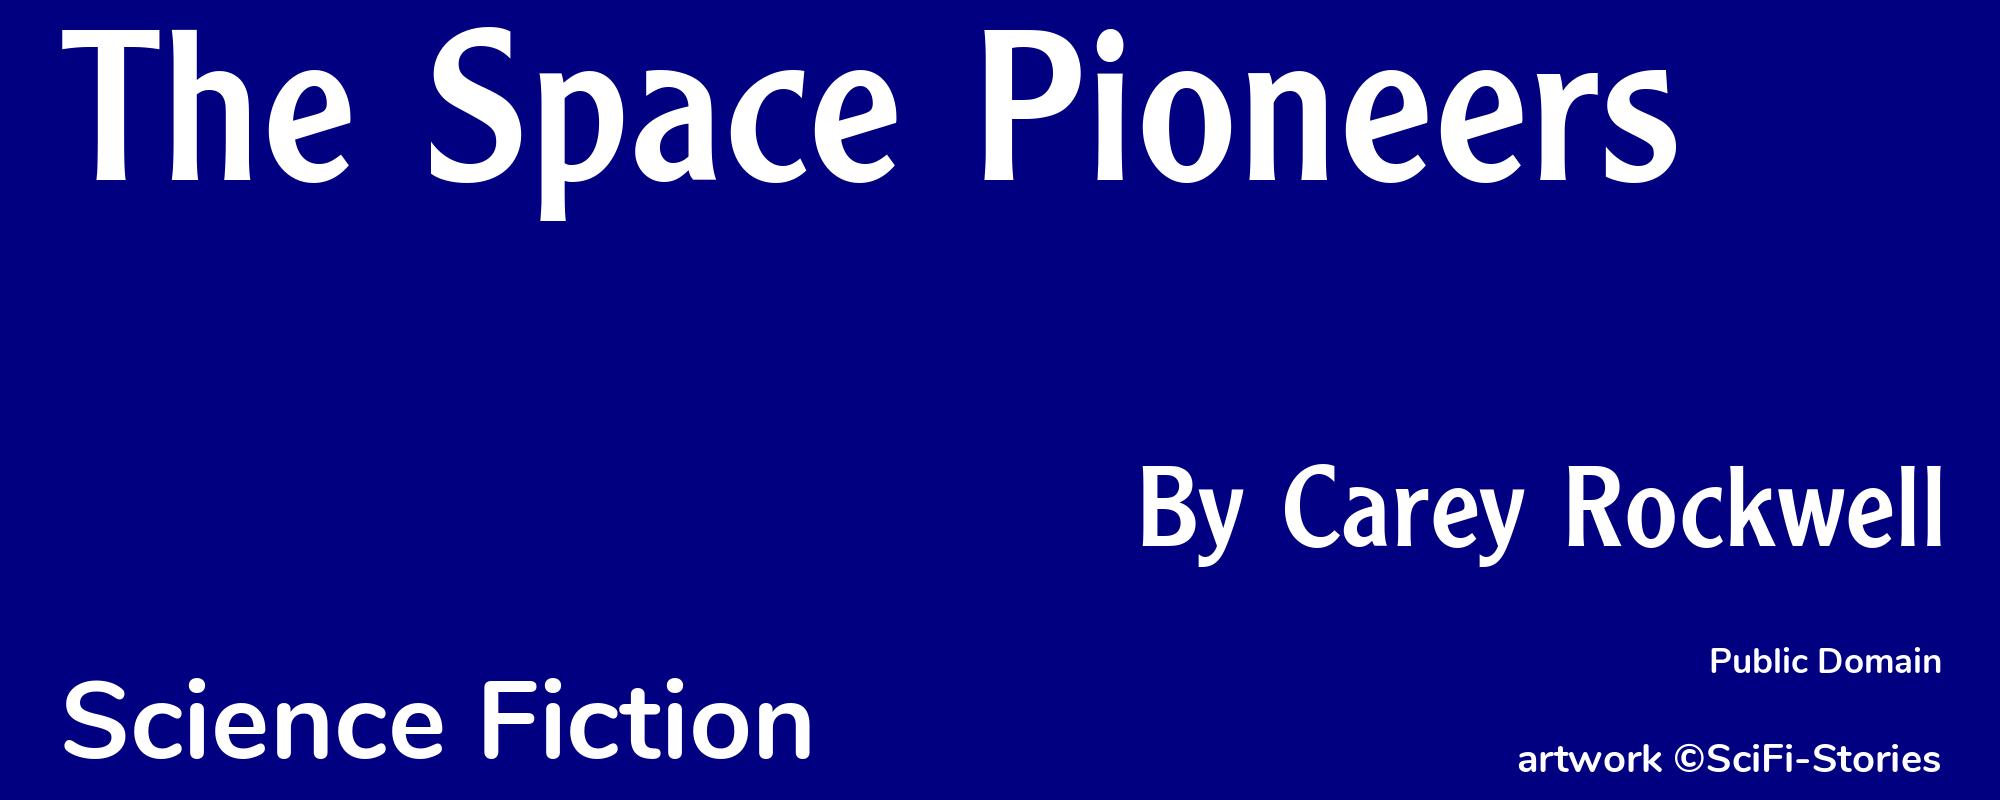 The Space Pioneers - Cover